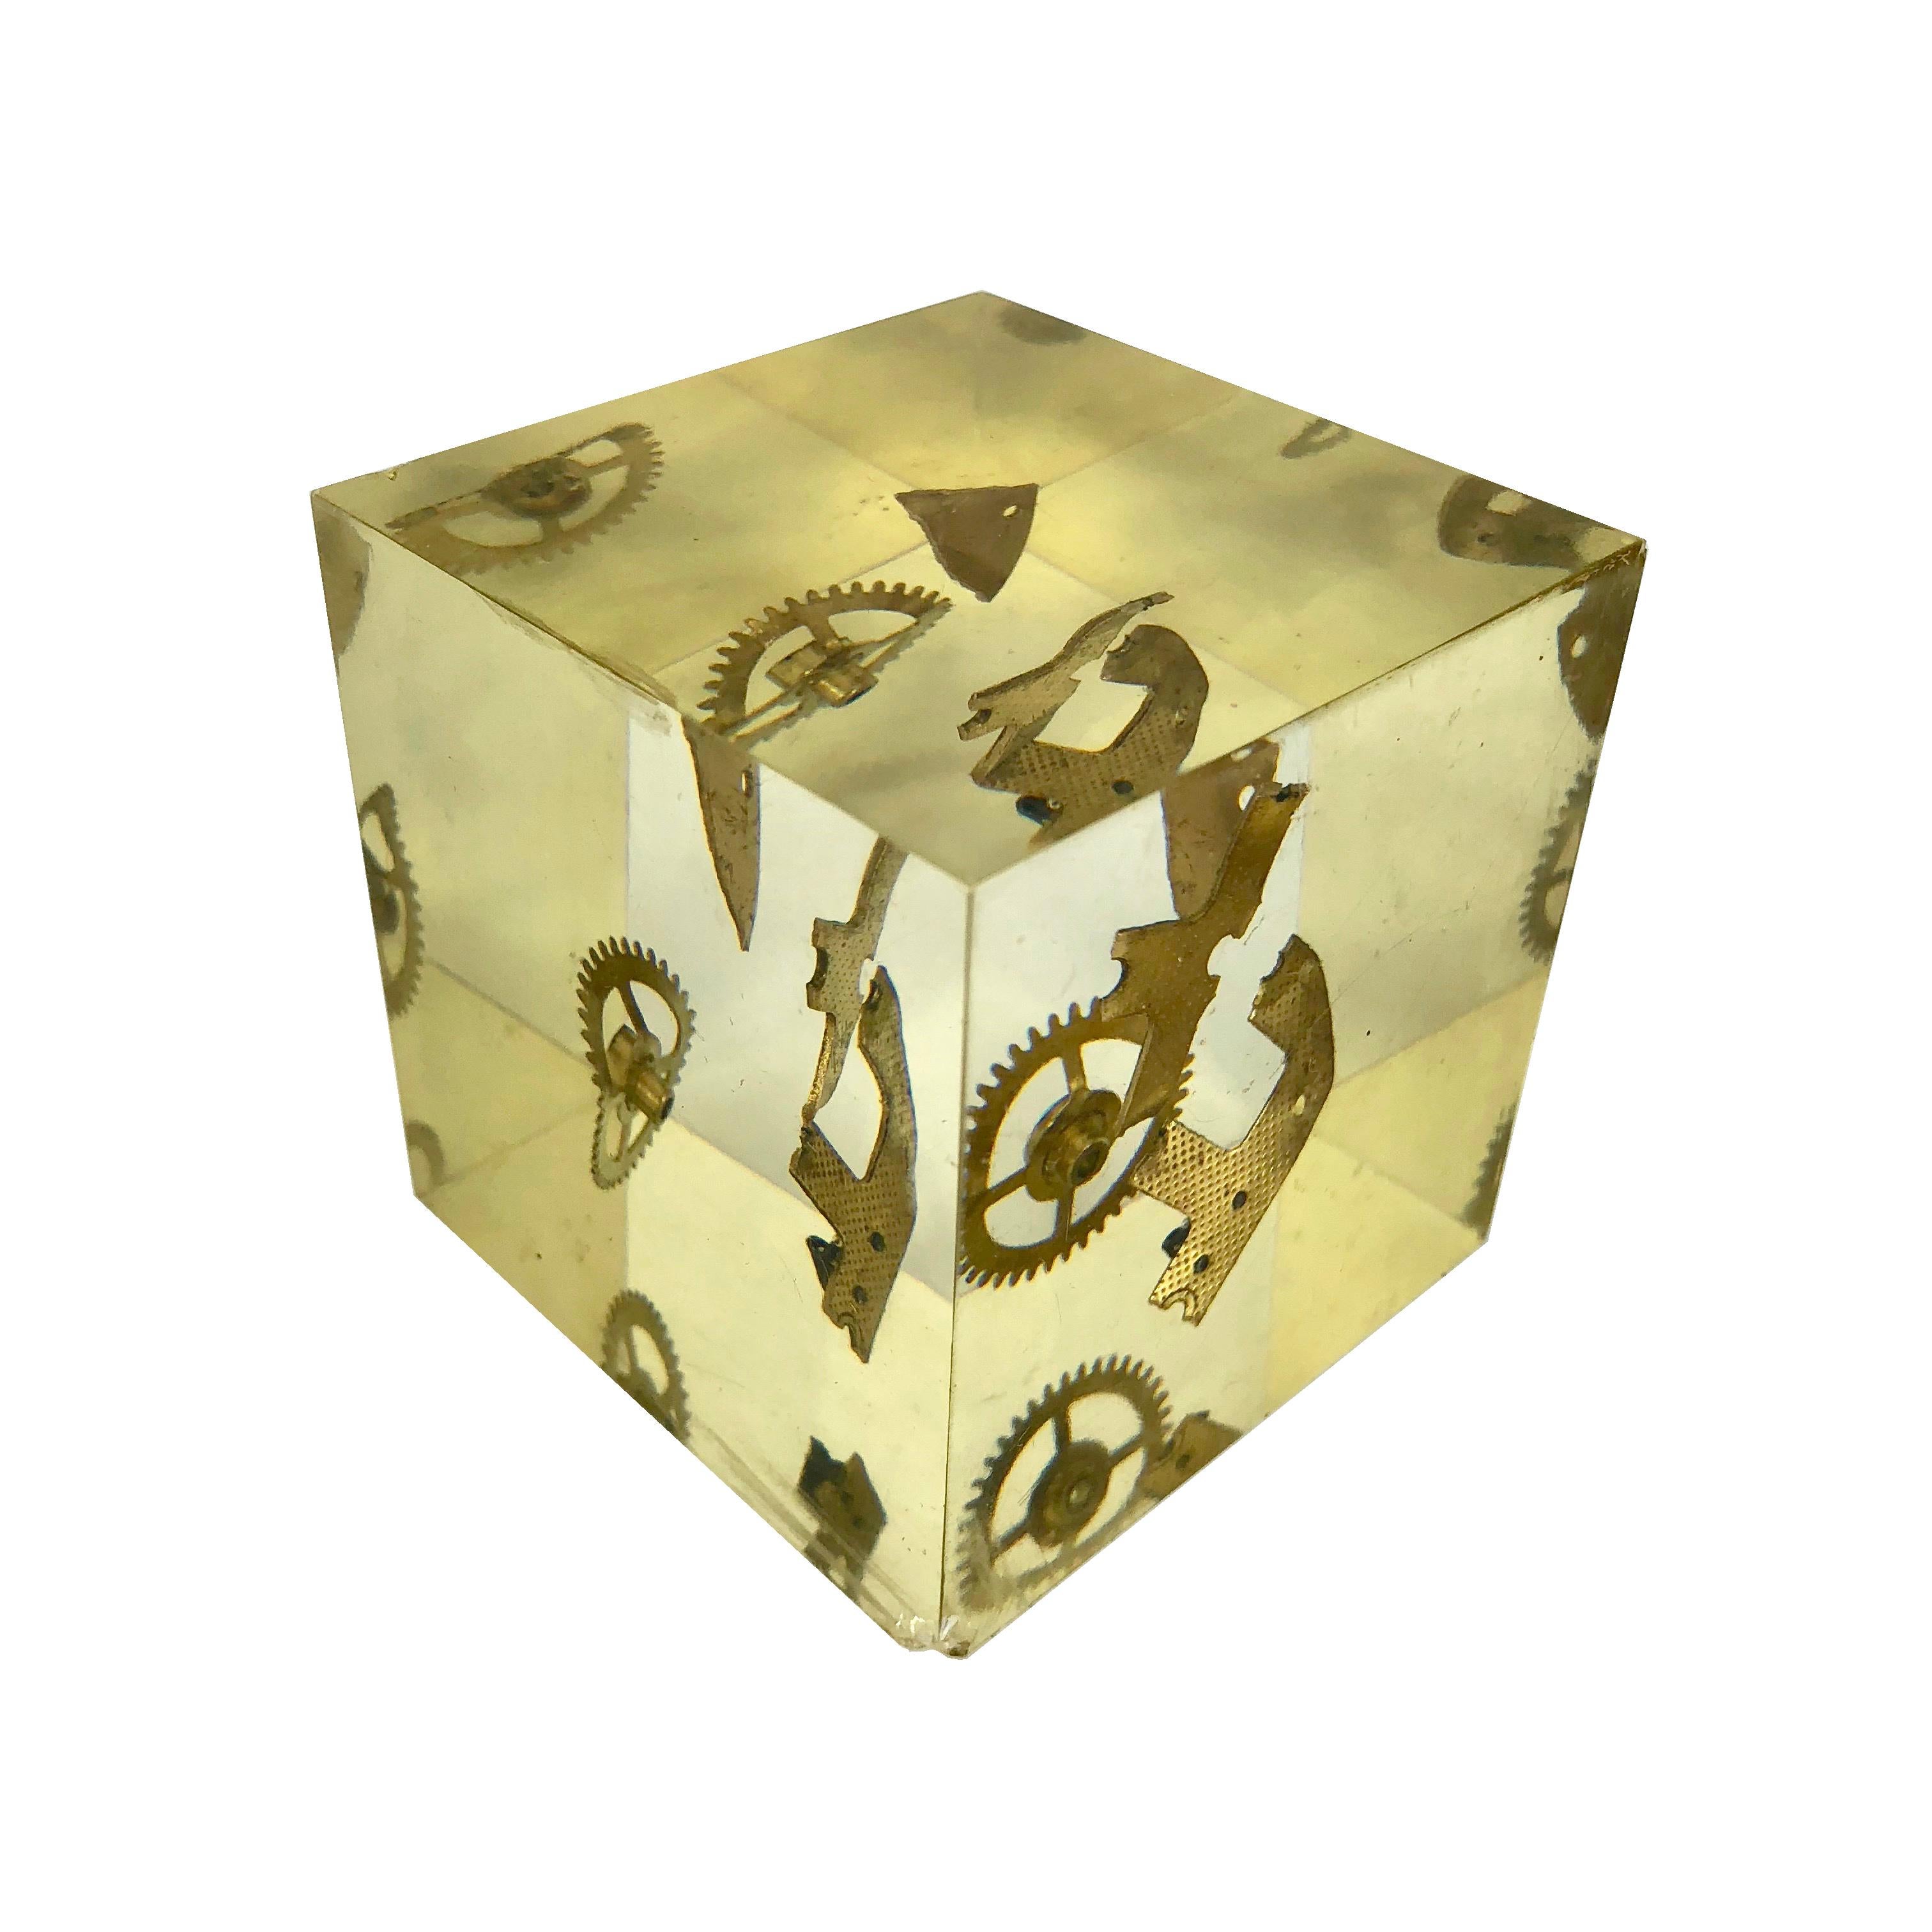 Modernist Lucite Resin Cube Sculpture with Gears Pierre Giraudon, France, 1970s In Fair Condition For Sale In Rome, IT